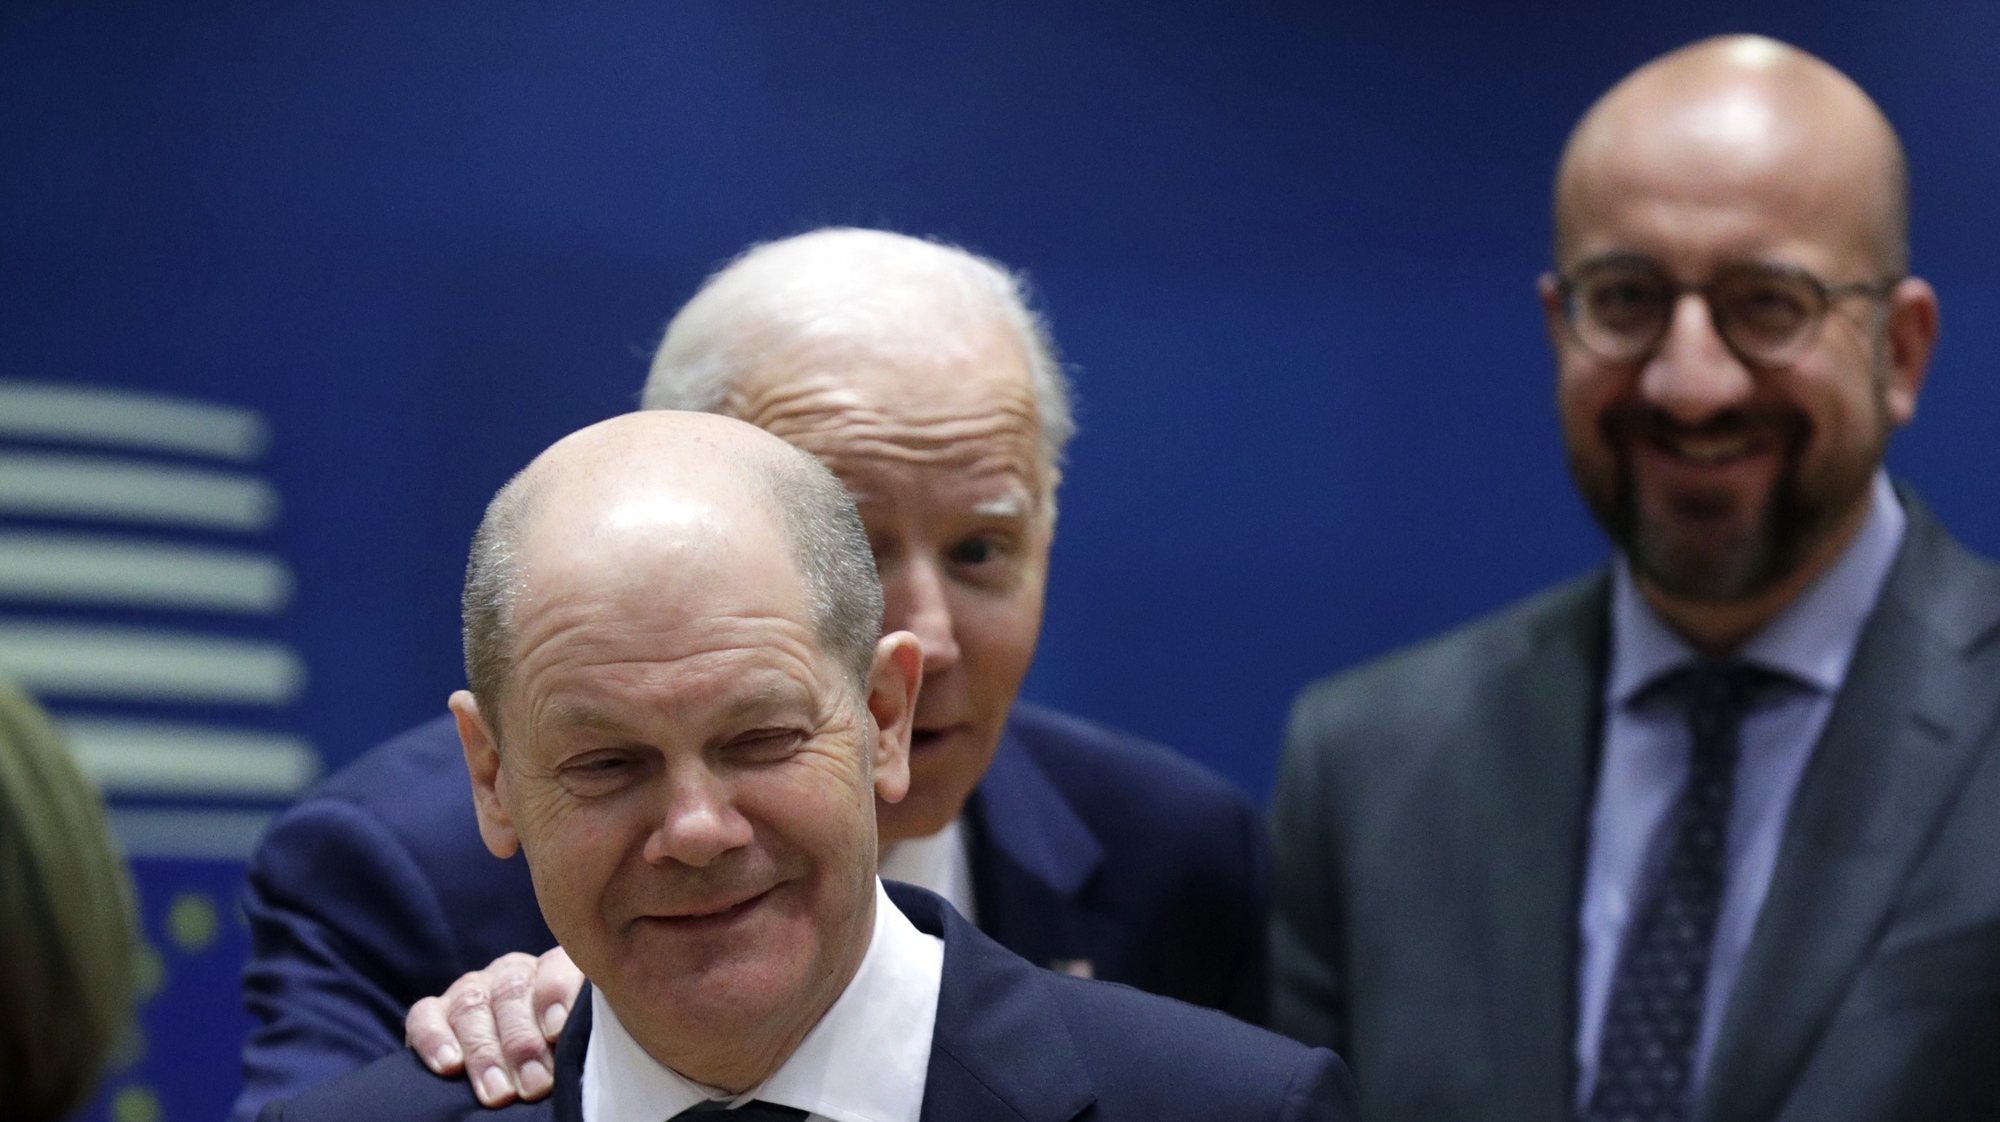 epa09847314 (L-R) German Chancellor Olaf Scholz, US President Joe Biden and Europen Council President Charles Michel at the start of European Council Summit in Brussels, Belgium, 24 March 2022. The European Council summit starts with the participation of US President Joe Biden to address Russia&#039;s ongoing military aggression against Ukraine. After that, Head of states will continue discussions on how best to support Ukraine in these dramatic circumstances.  EPA/OLIVIER HOSLET